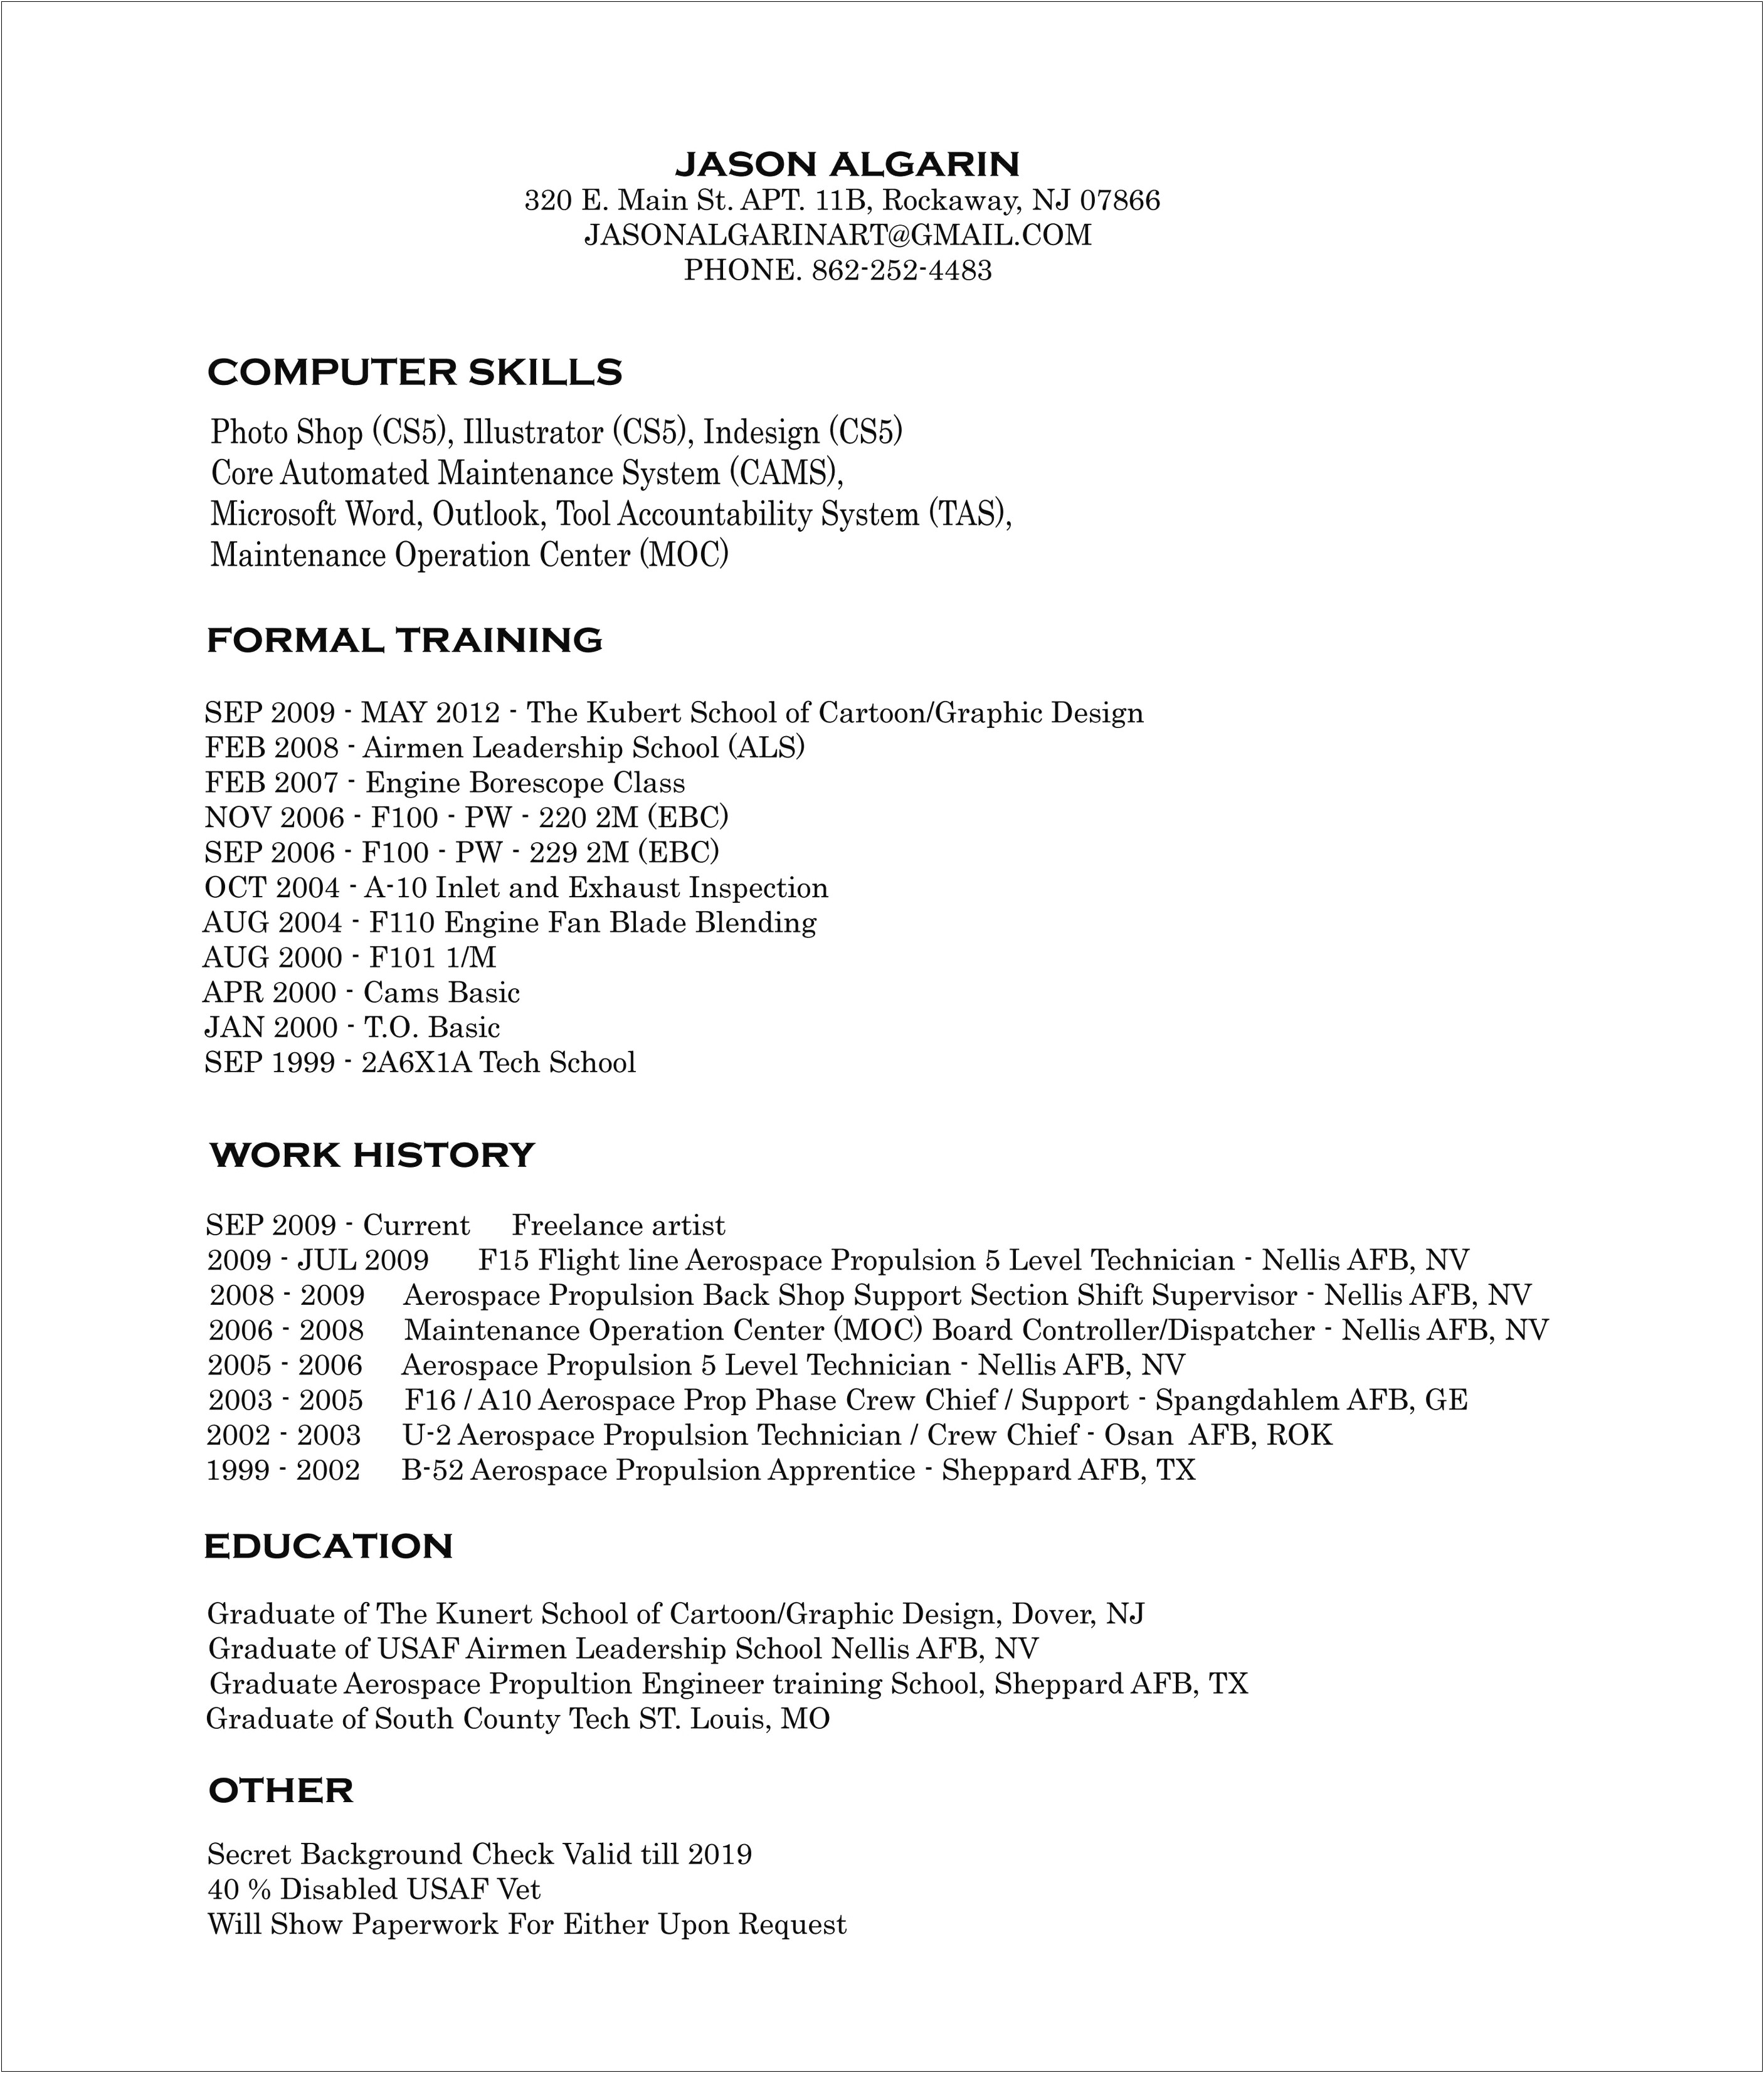 Does Moc Look Good On Resume